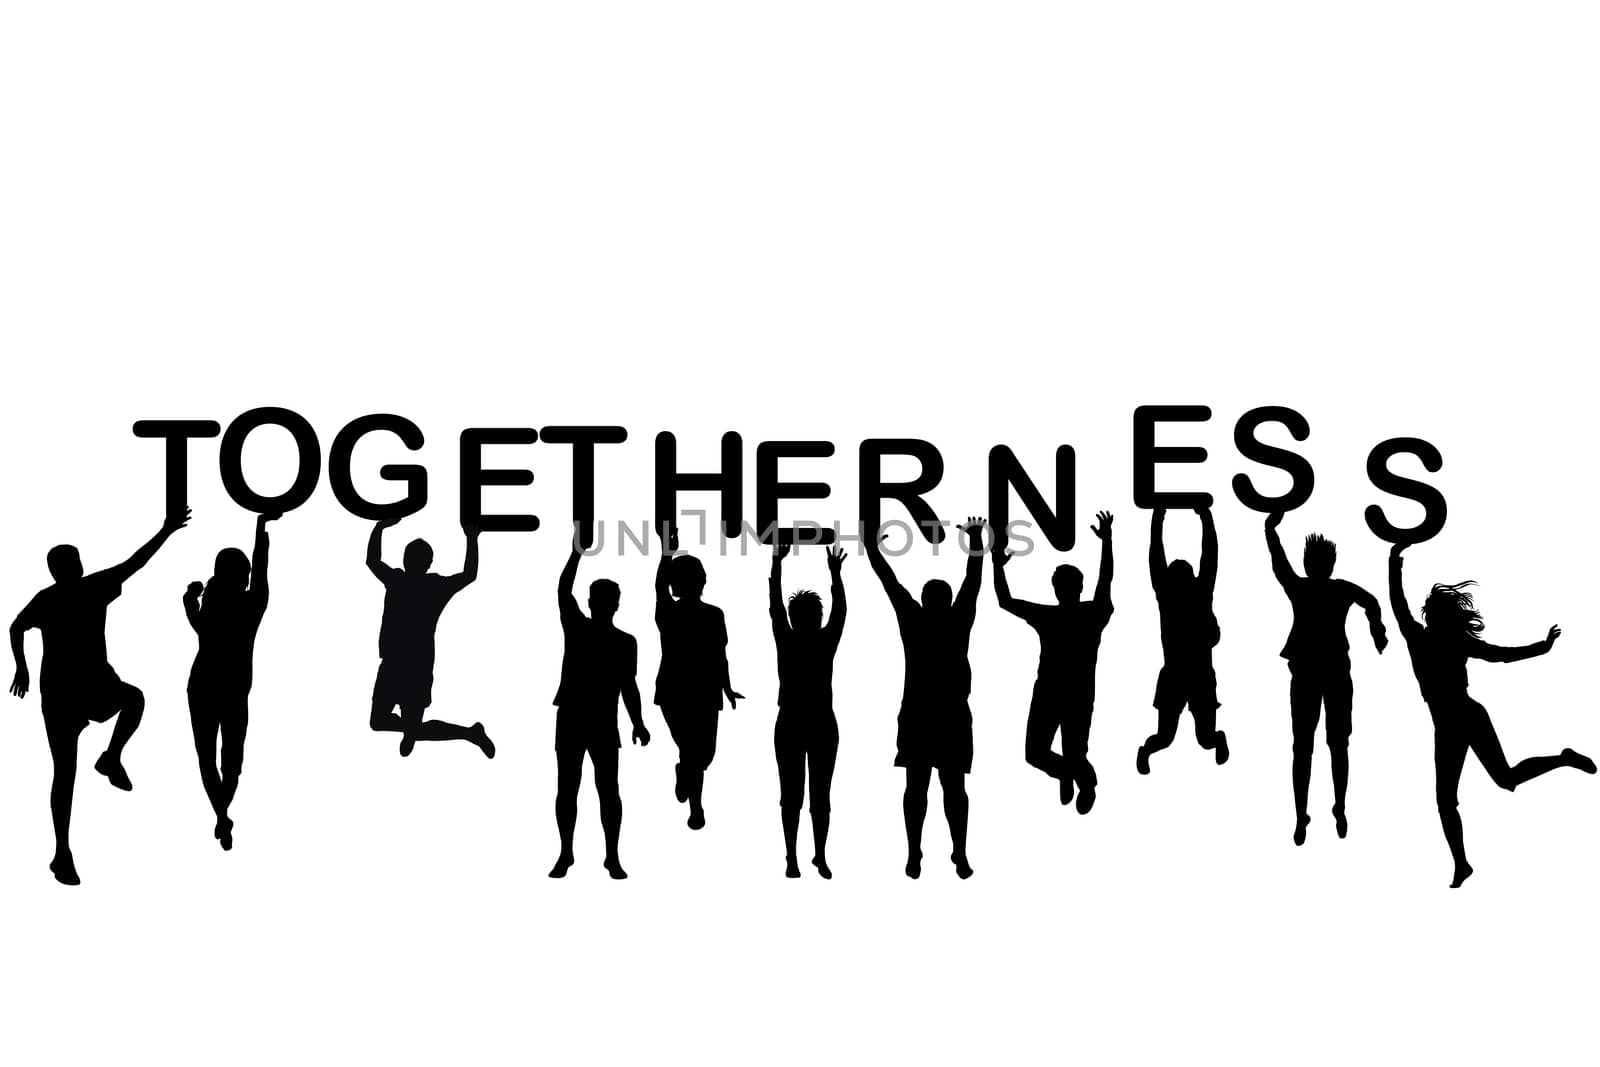 People silhouettes holding letter with word Togetherness by hibrida13